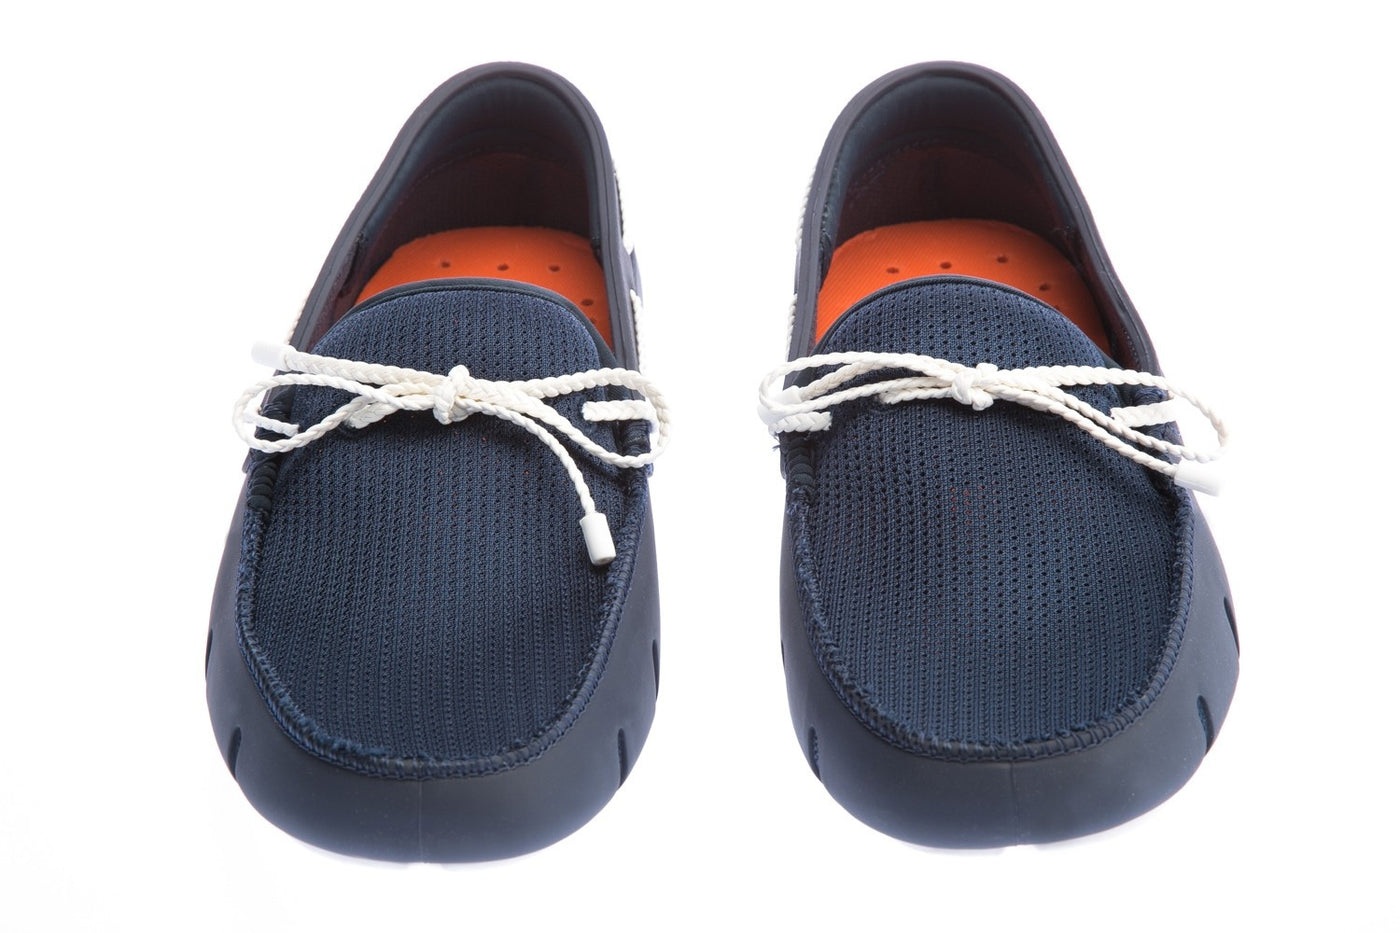 Swims Braided Lace Loafer Shoe in Navy & White Pair